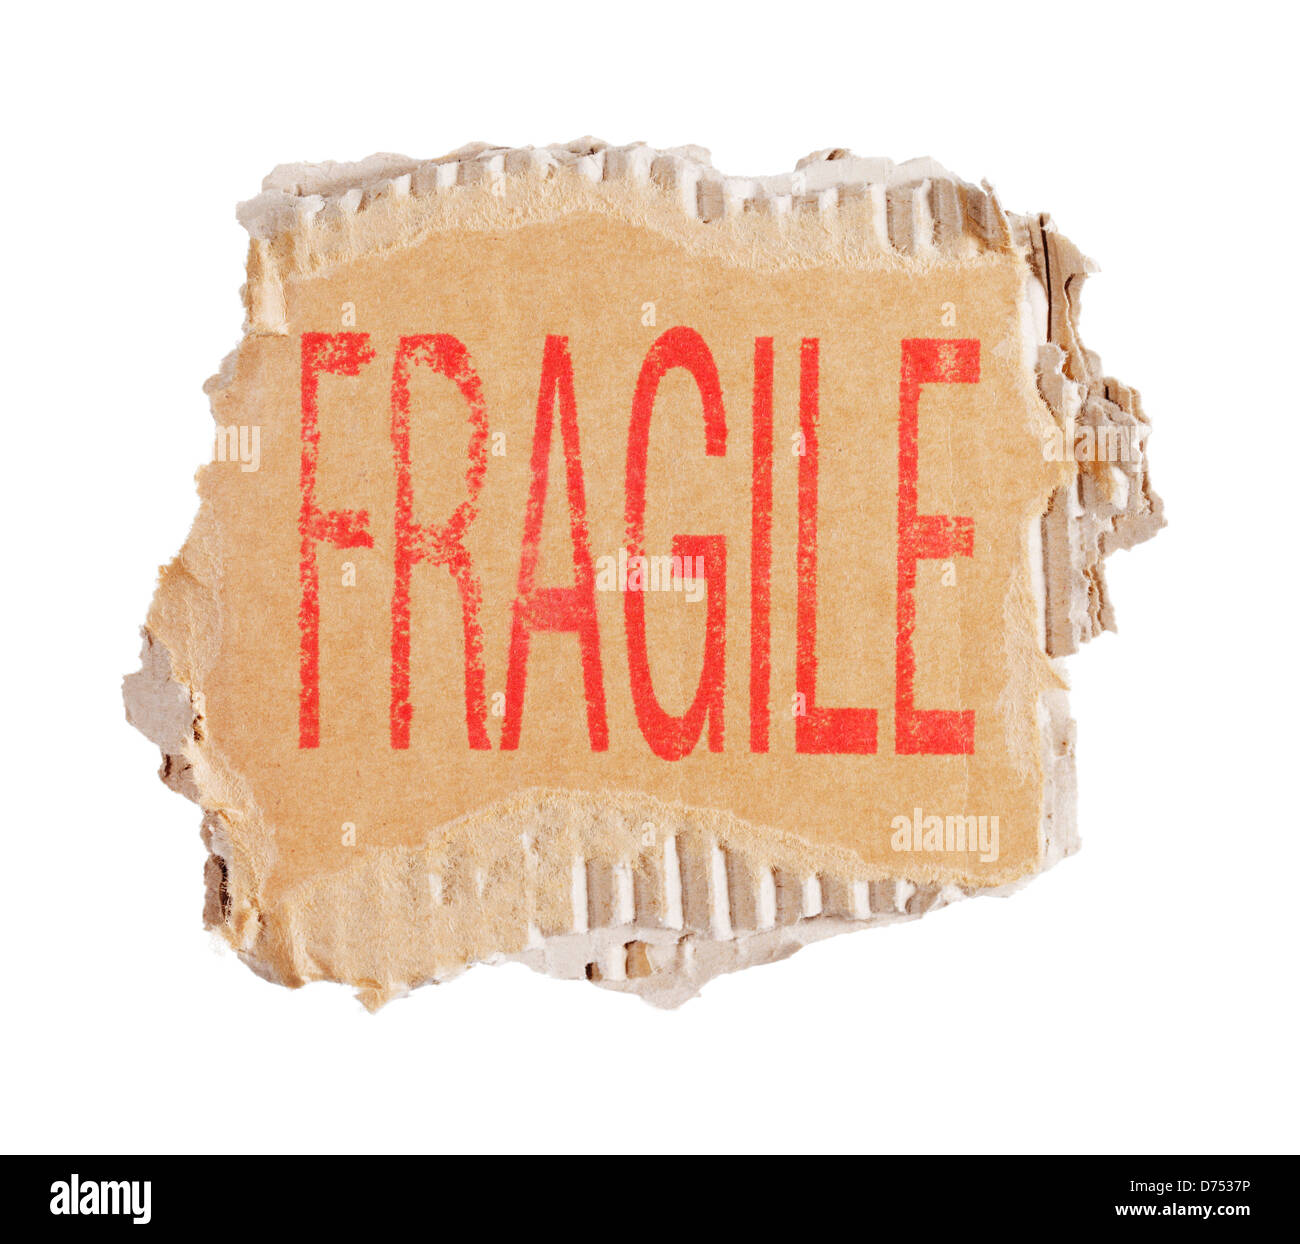 Word Fragile stamped on a piece of brown corrugated cardboard. Stock Photo